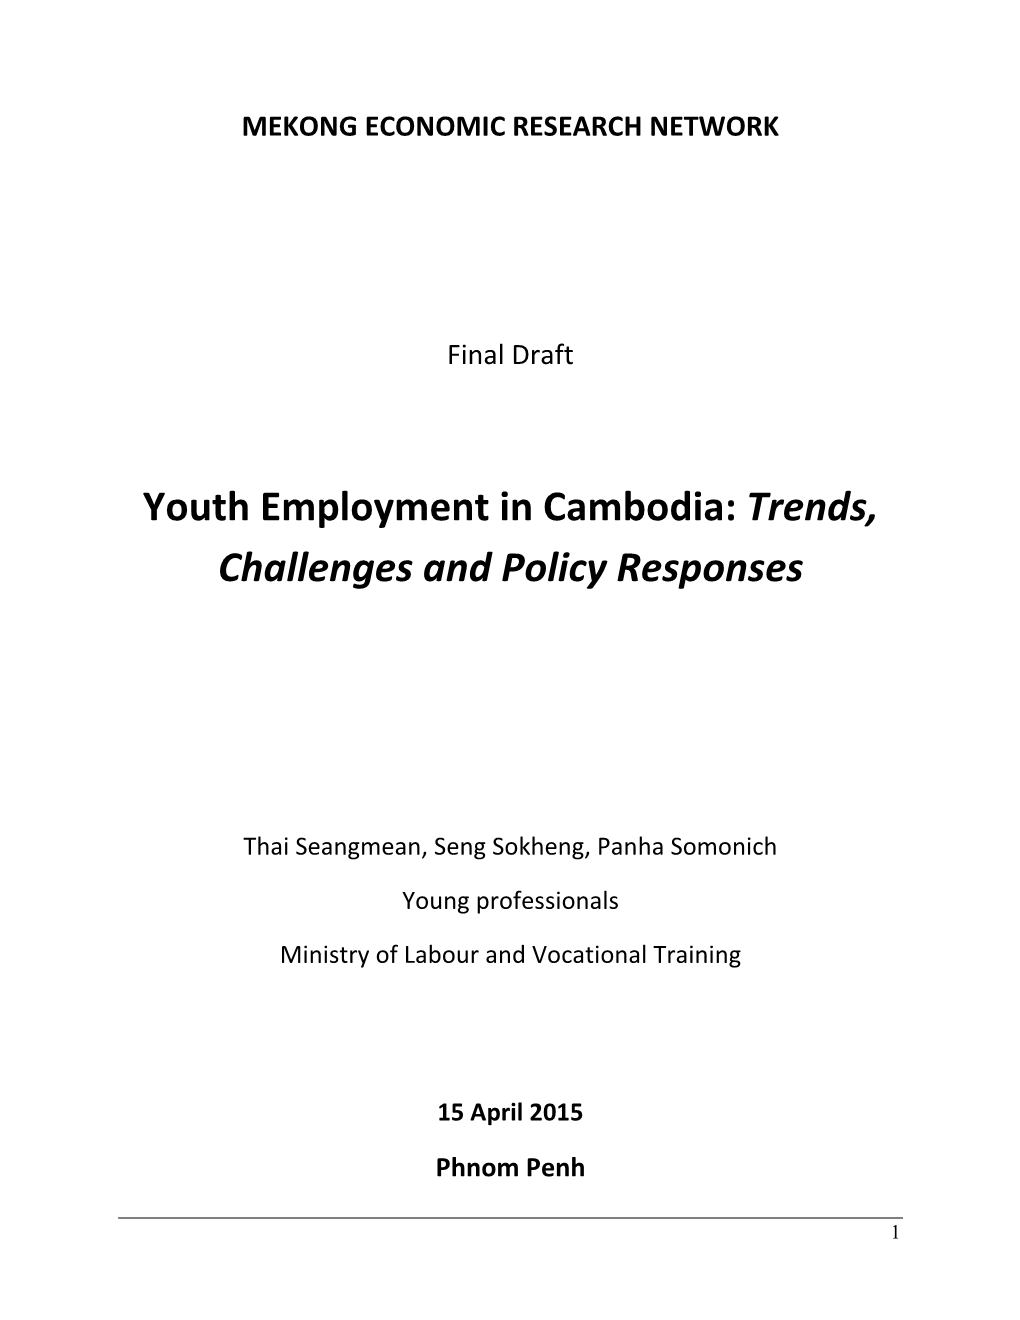 Youth Employment in Cambodia: Trends, Challenges and Policy Responses